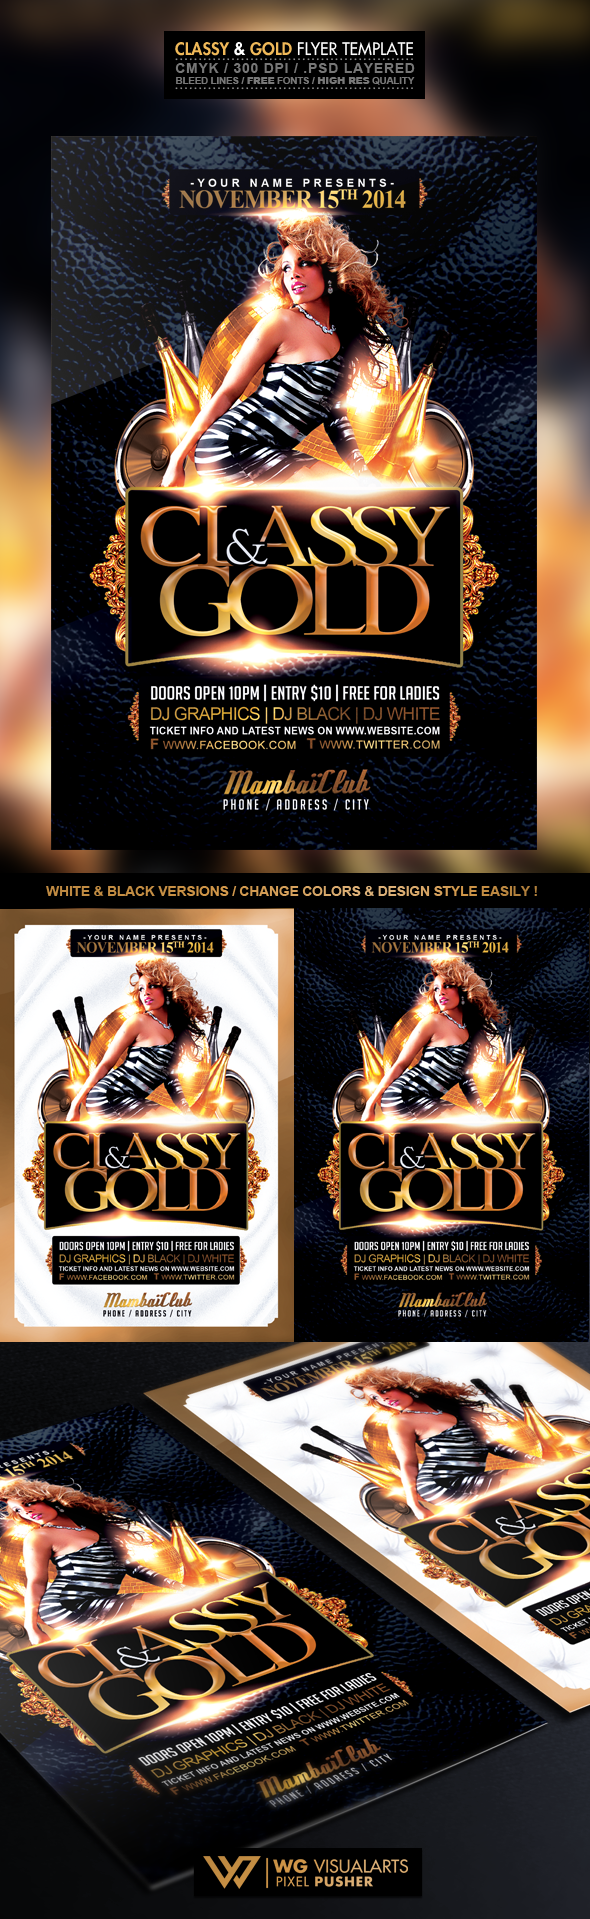 Classy And Gold Free Flyer Template